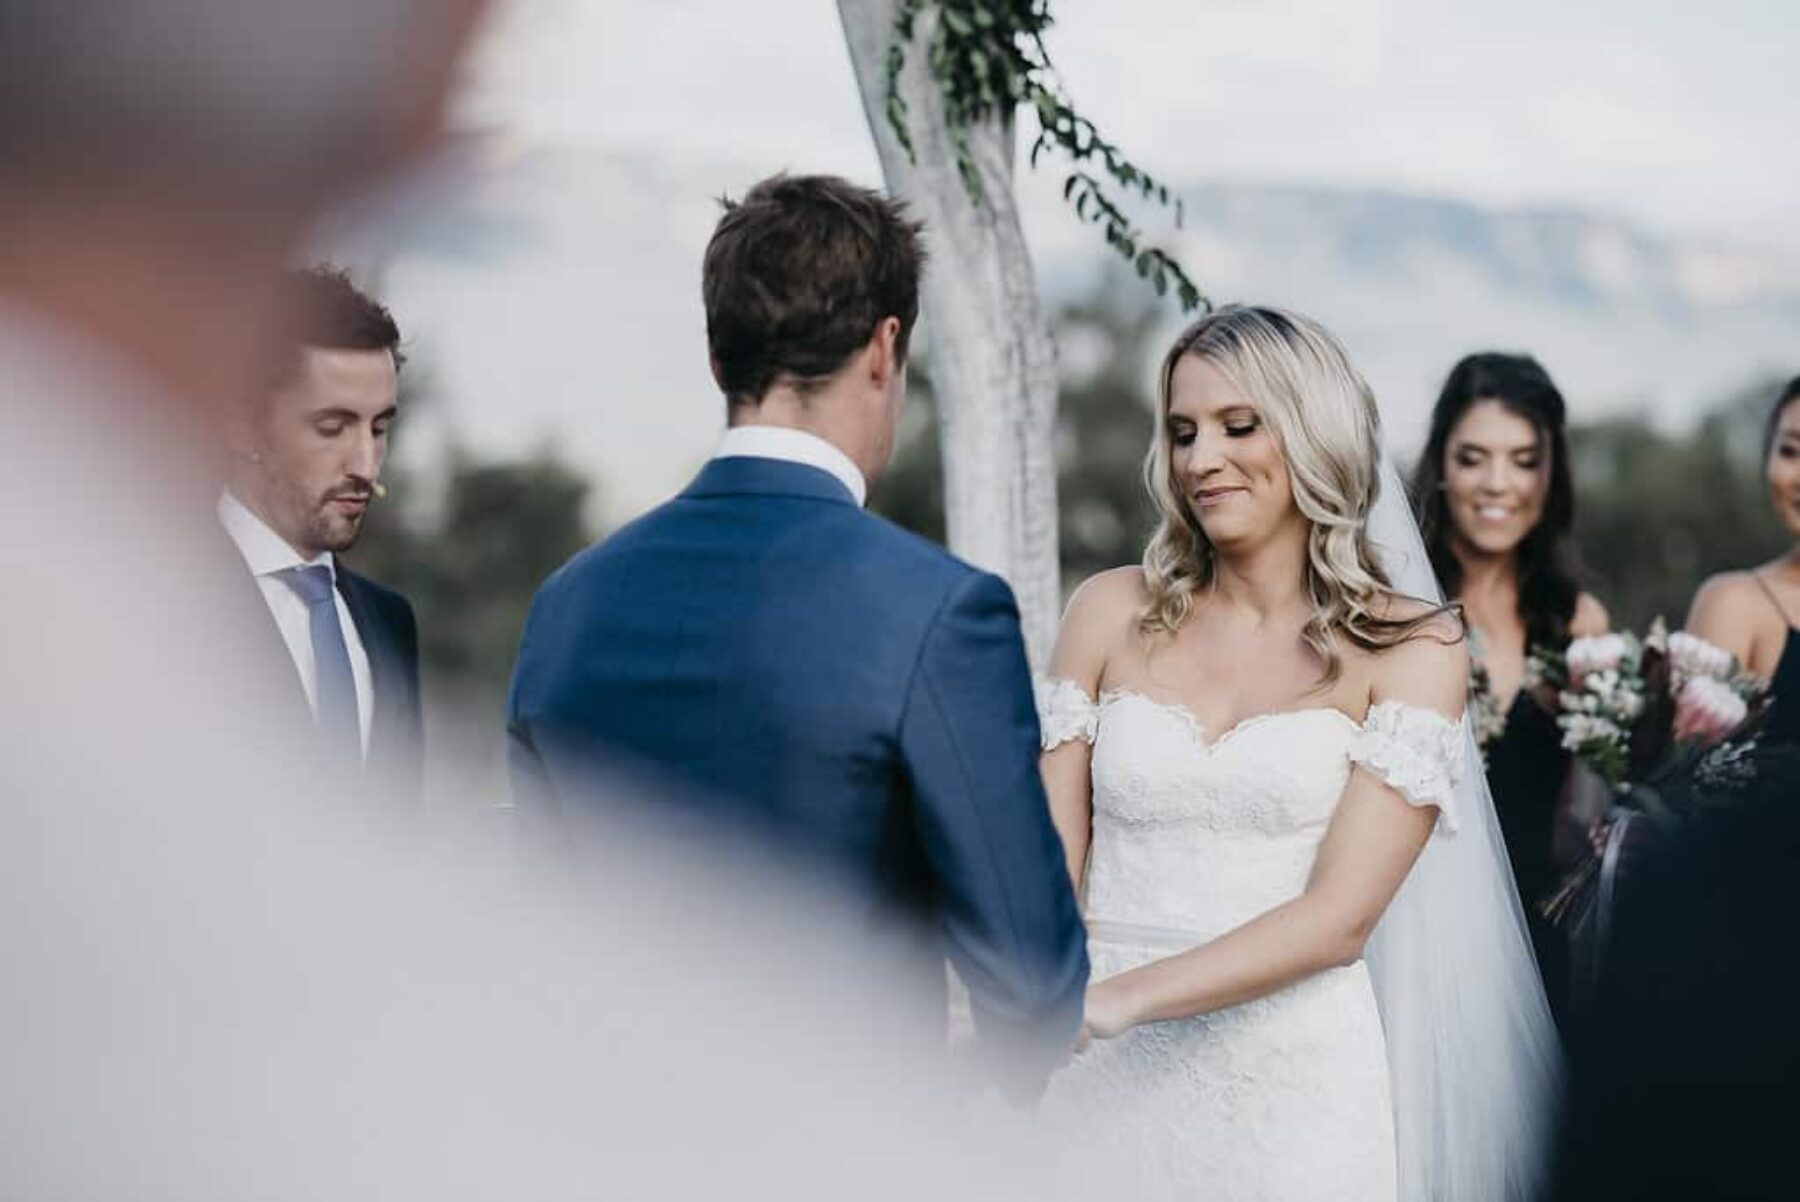 3-day camping festival wedding in the Blue Mountains - Jason Corroto Photography